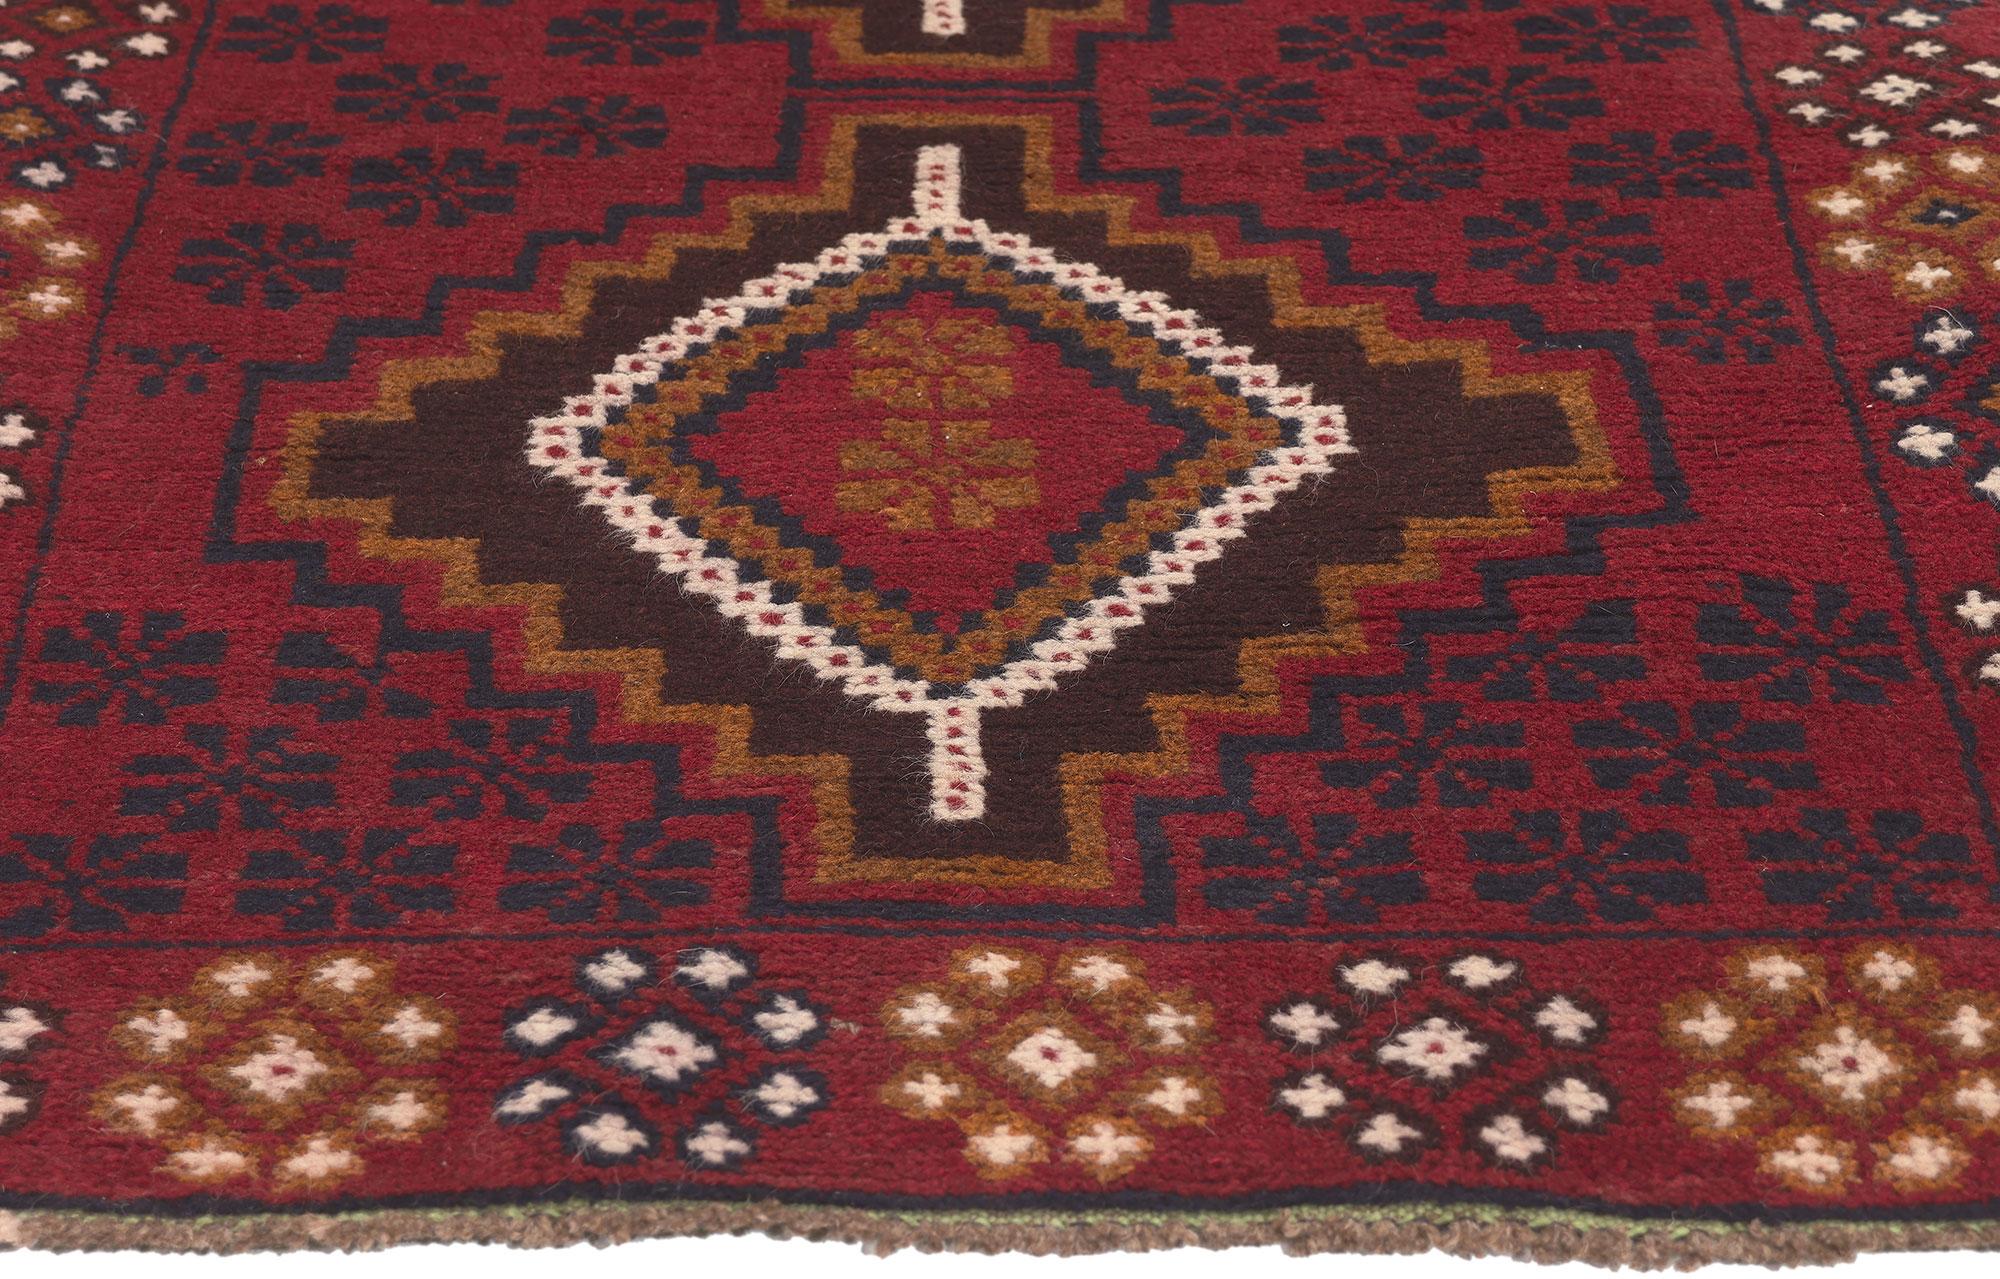 Vintage Afghan Baluch Rug, Tribal Style Meets Afghani Nomad Charm In Good Condition For Sale In Dallas, TX